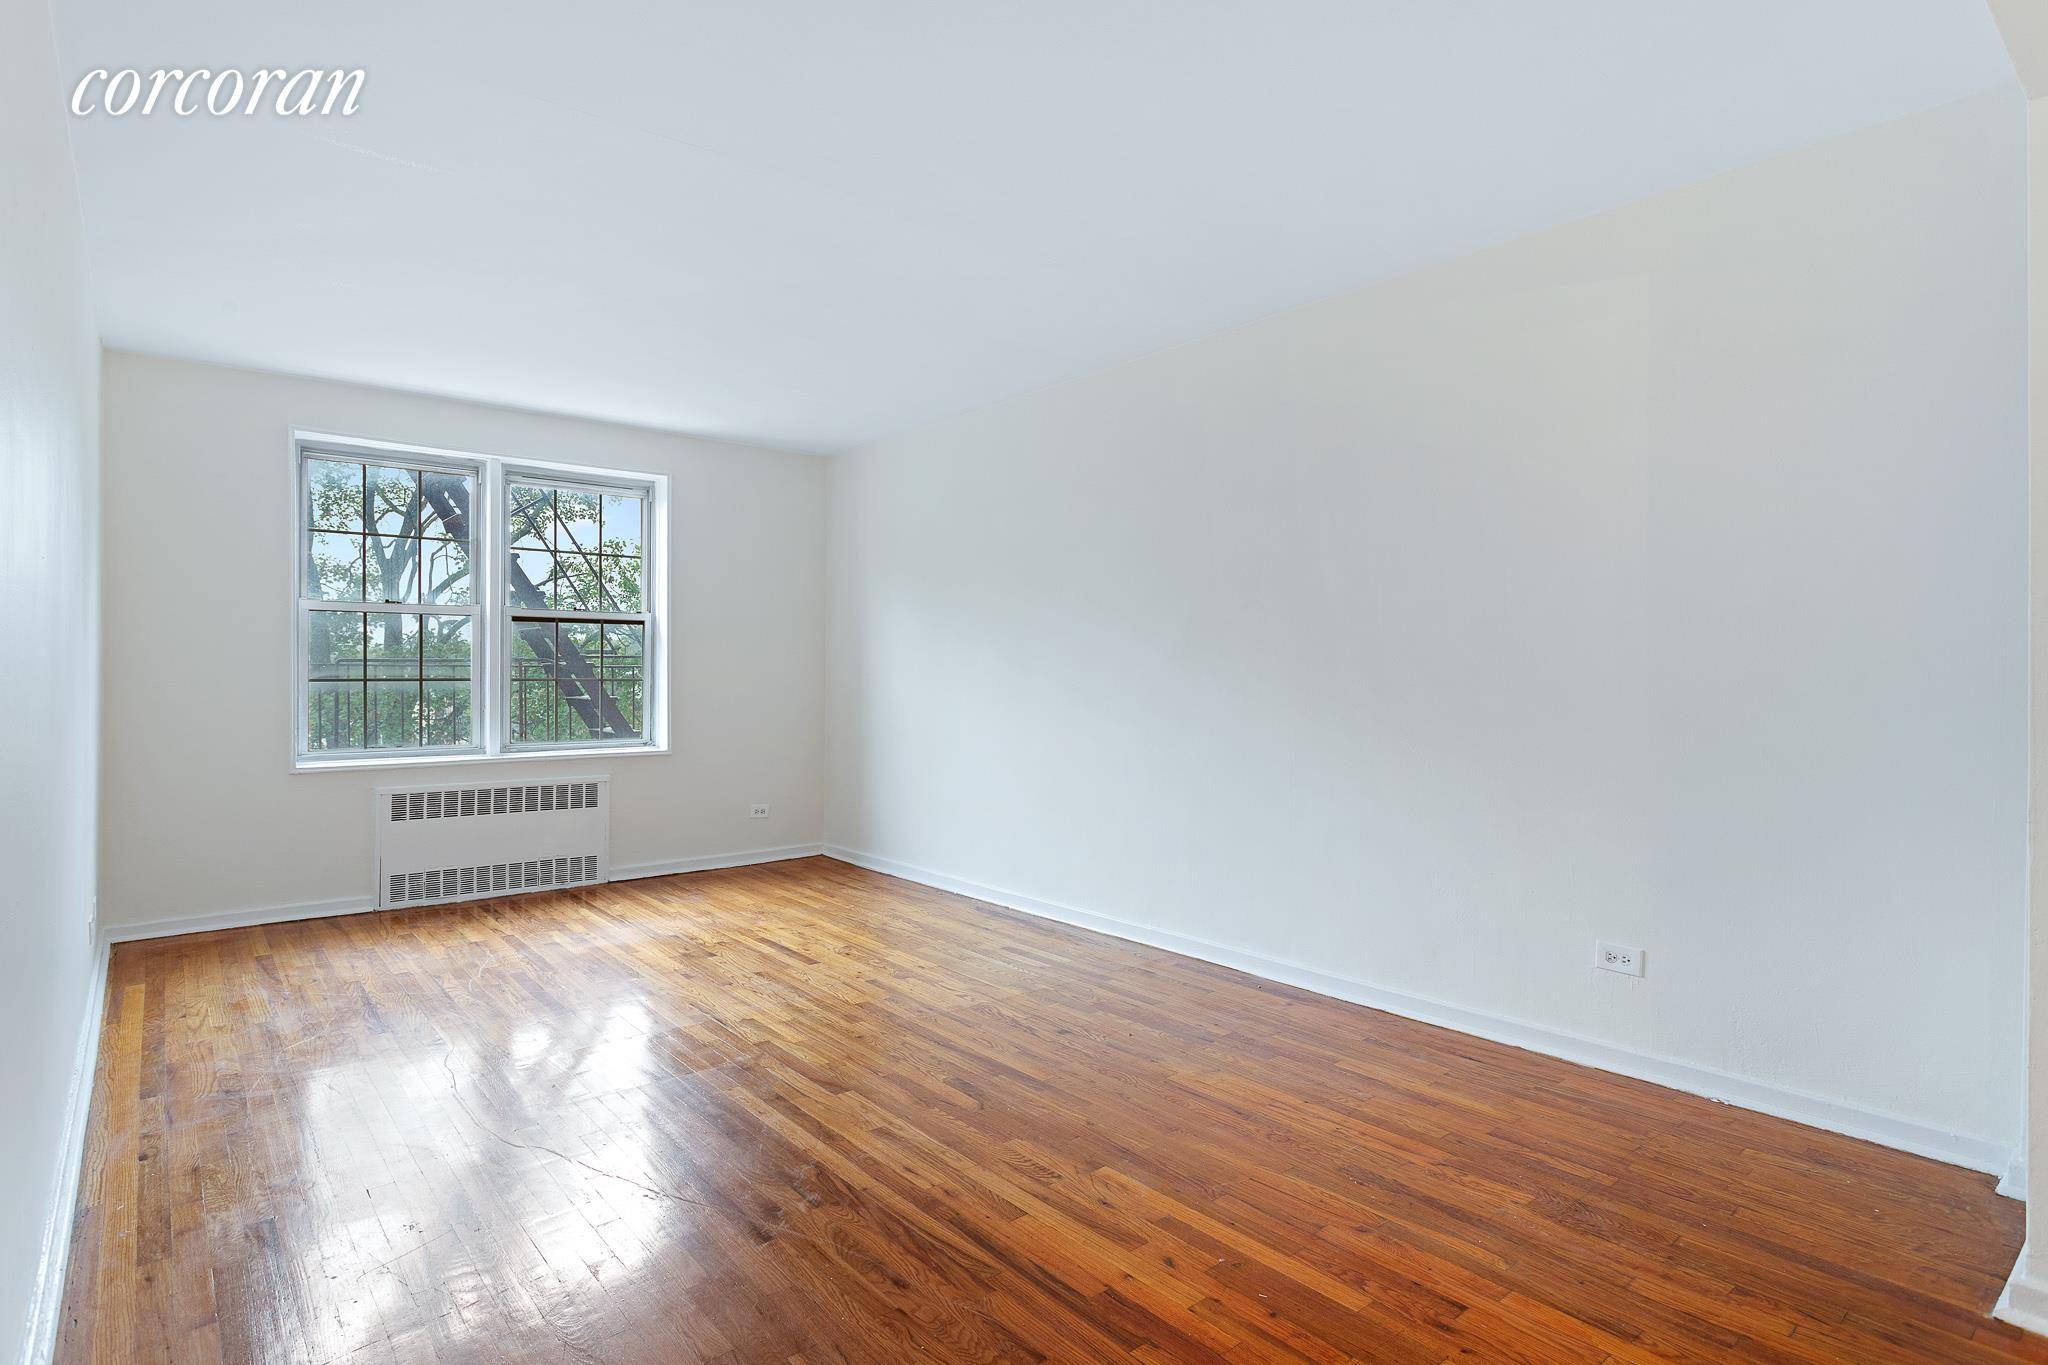 Sunny and Sprawling one bedroom convertible 2BR apartment in a well maintained building on a pretty, tree lined block in vibrant Rego Park.